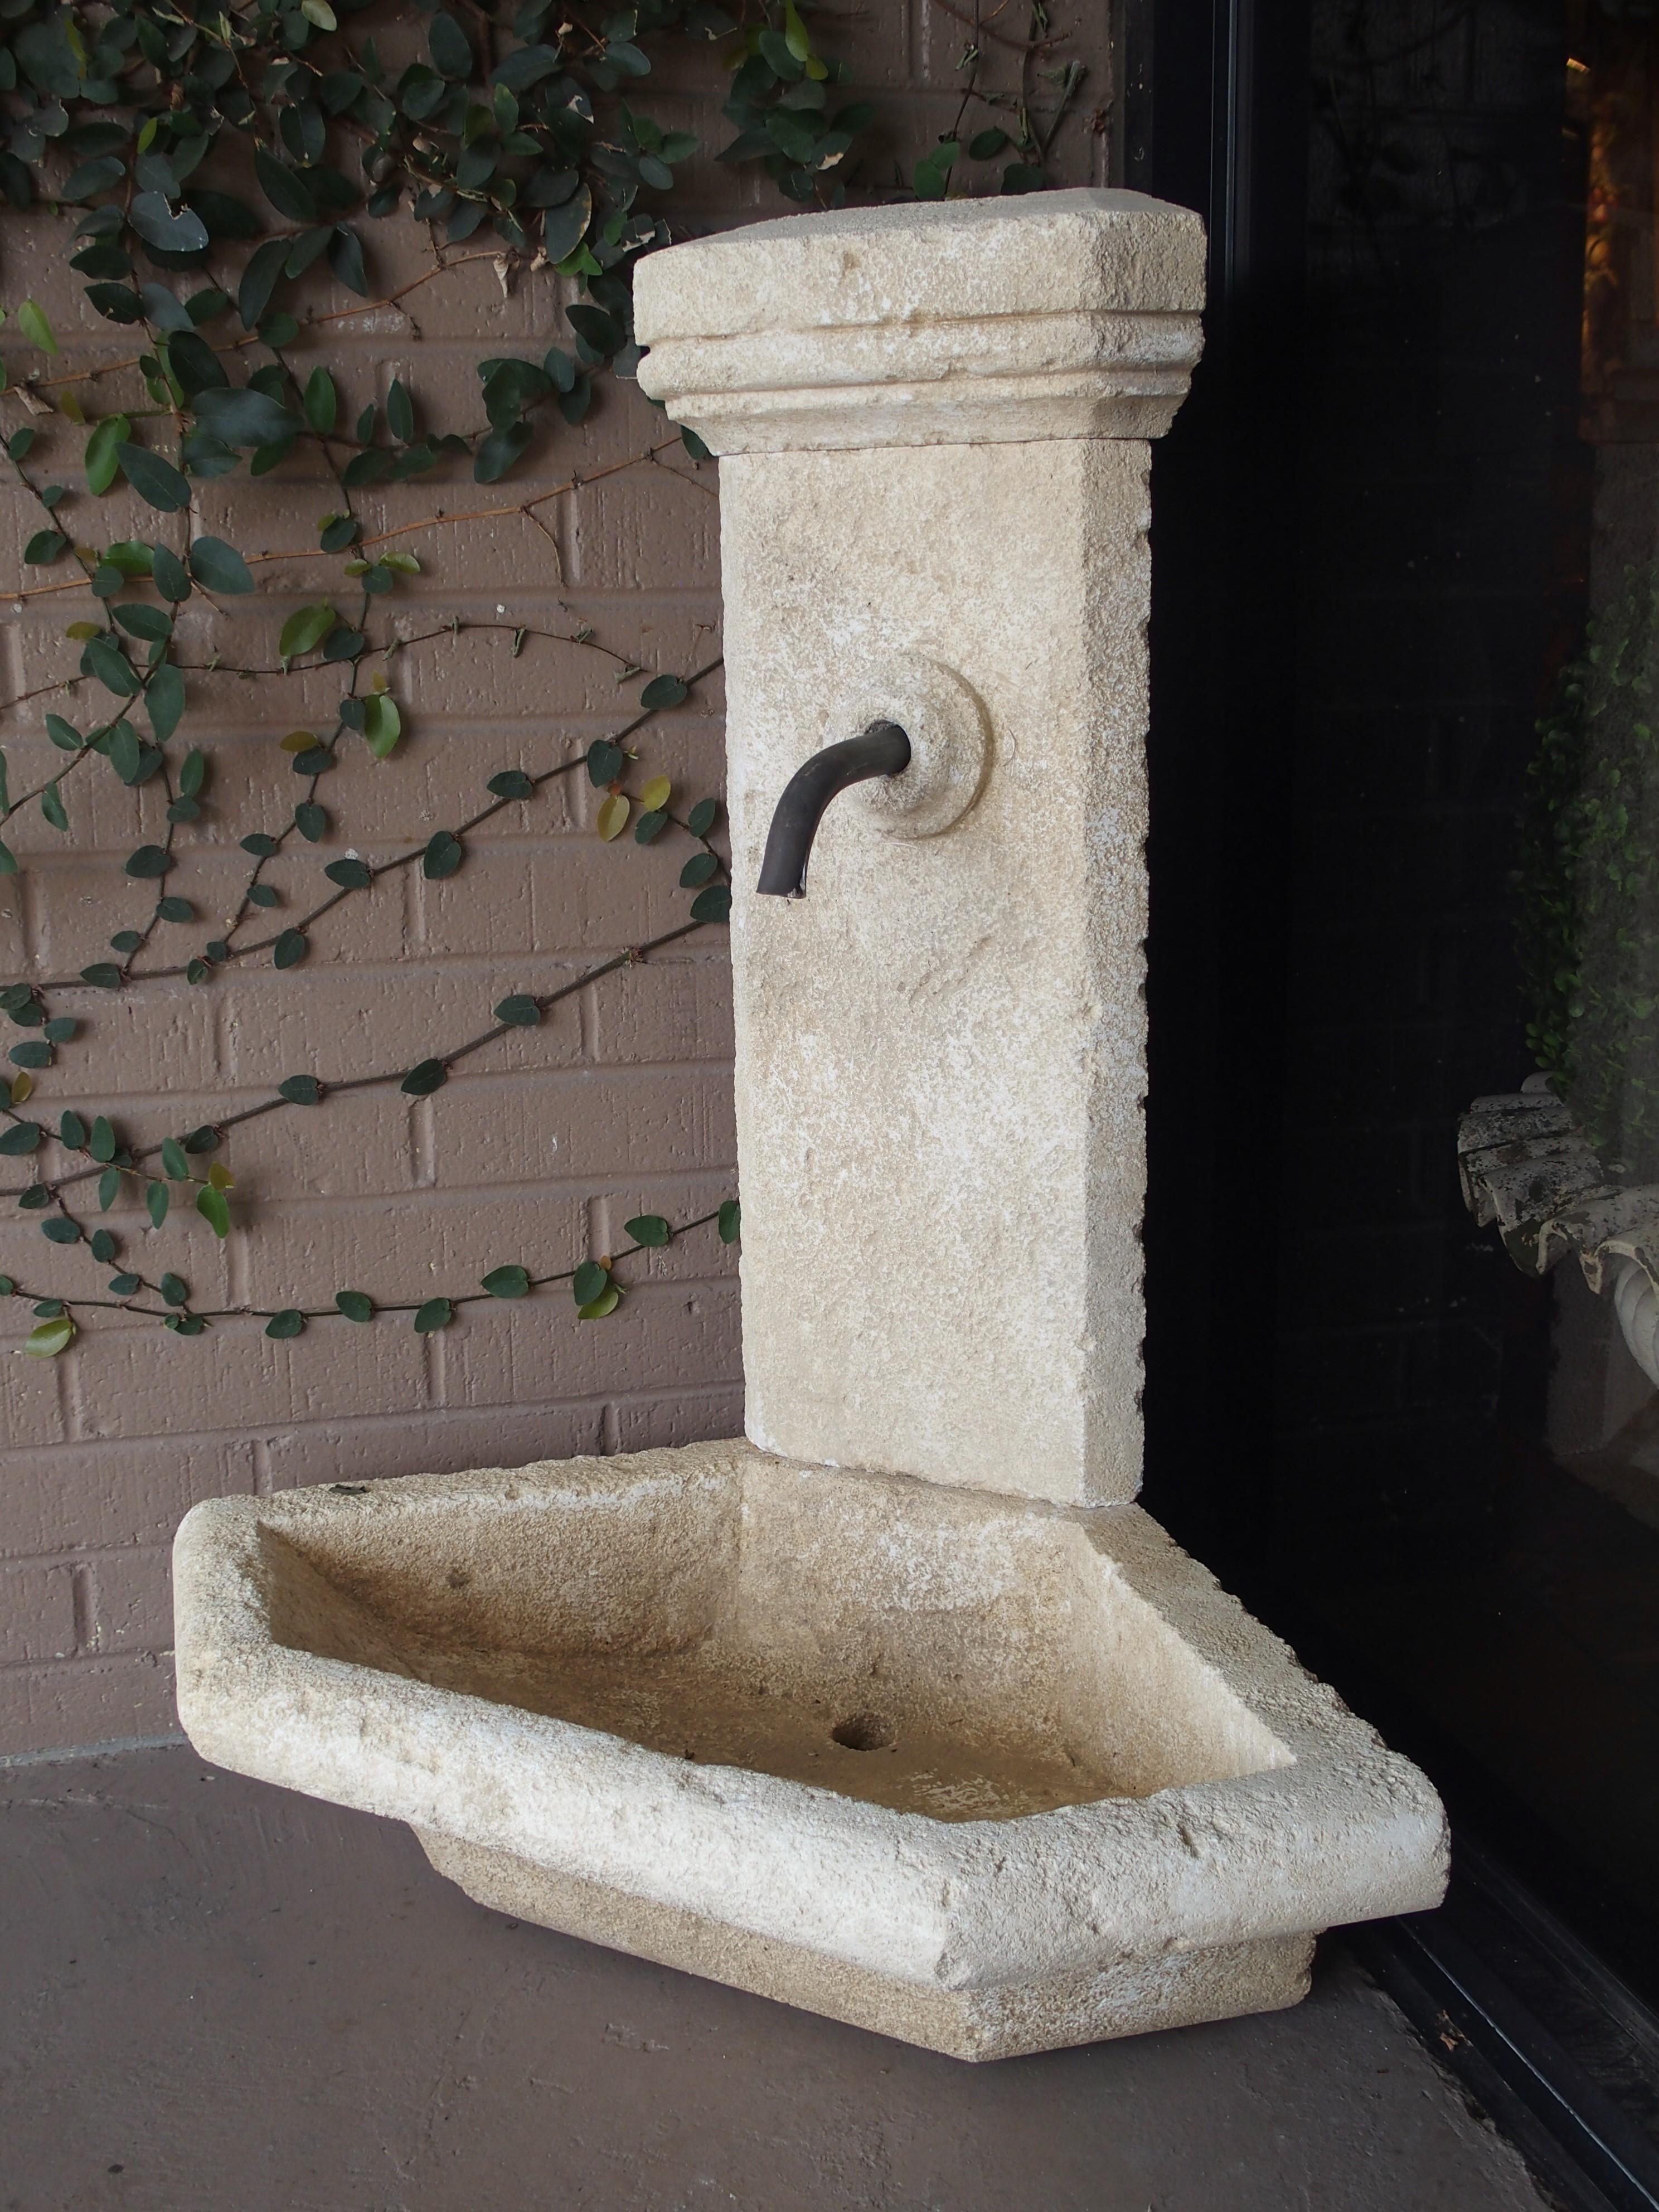 This charming hand carved corner fountain from the South of France is made from Estaillade limestone. The stone has a soft natural color patina added in addition to distressed markings. This fountain is quite unique in that it can be free-standing